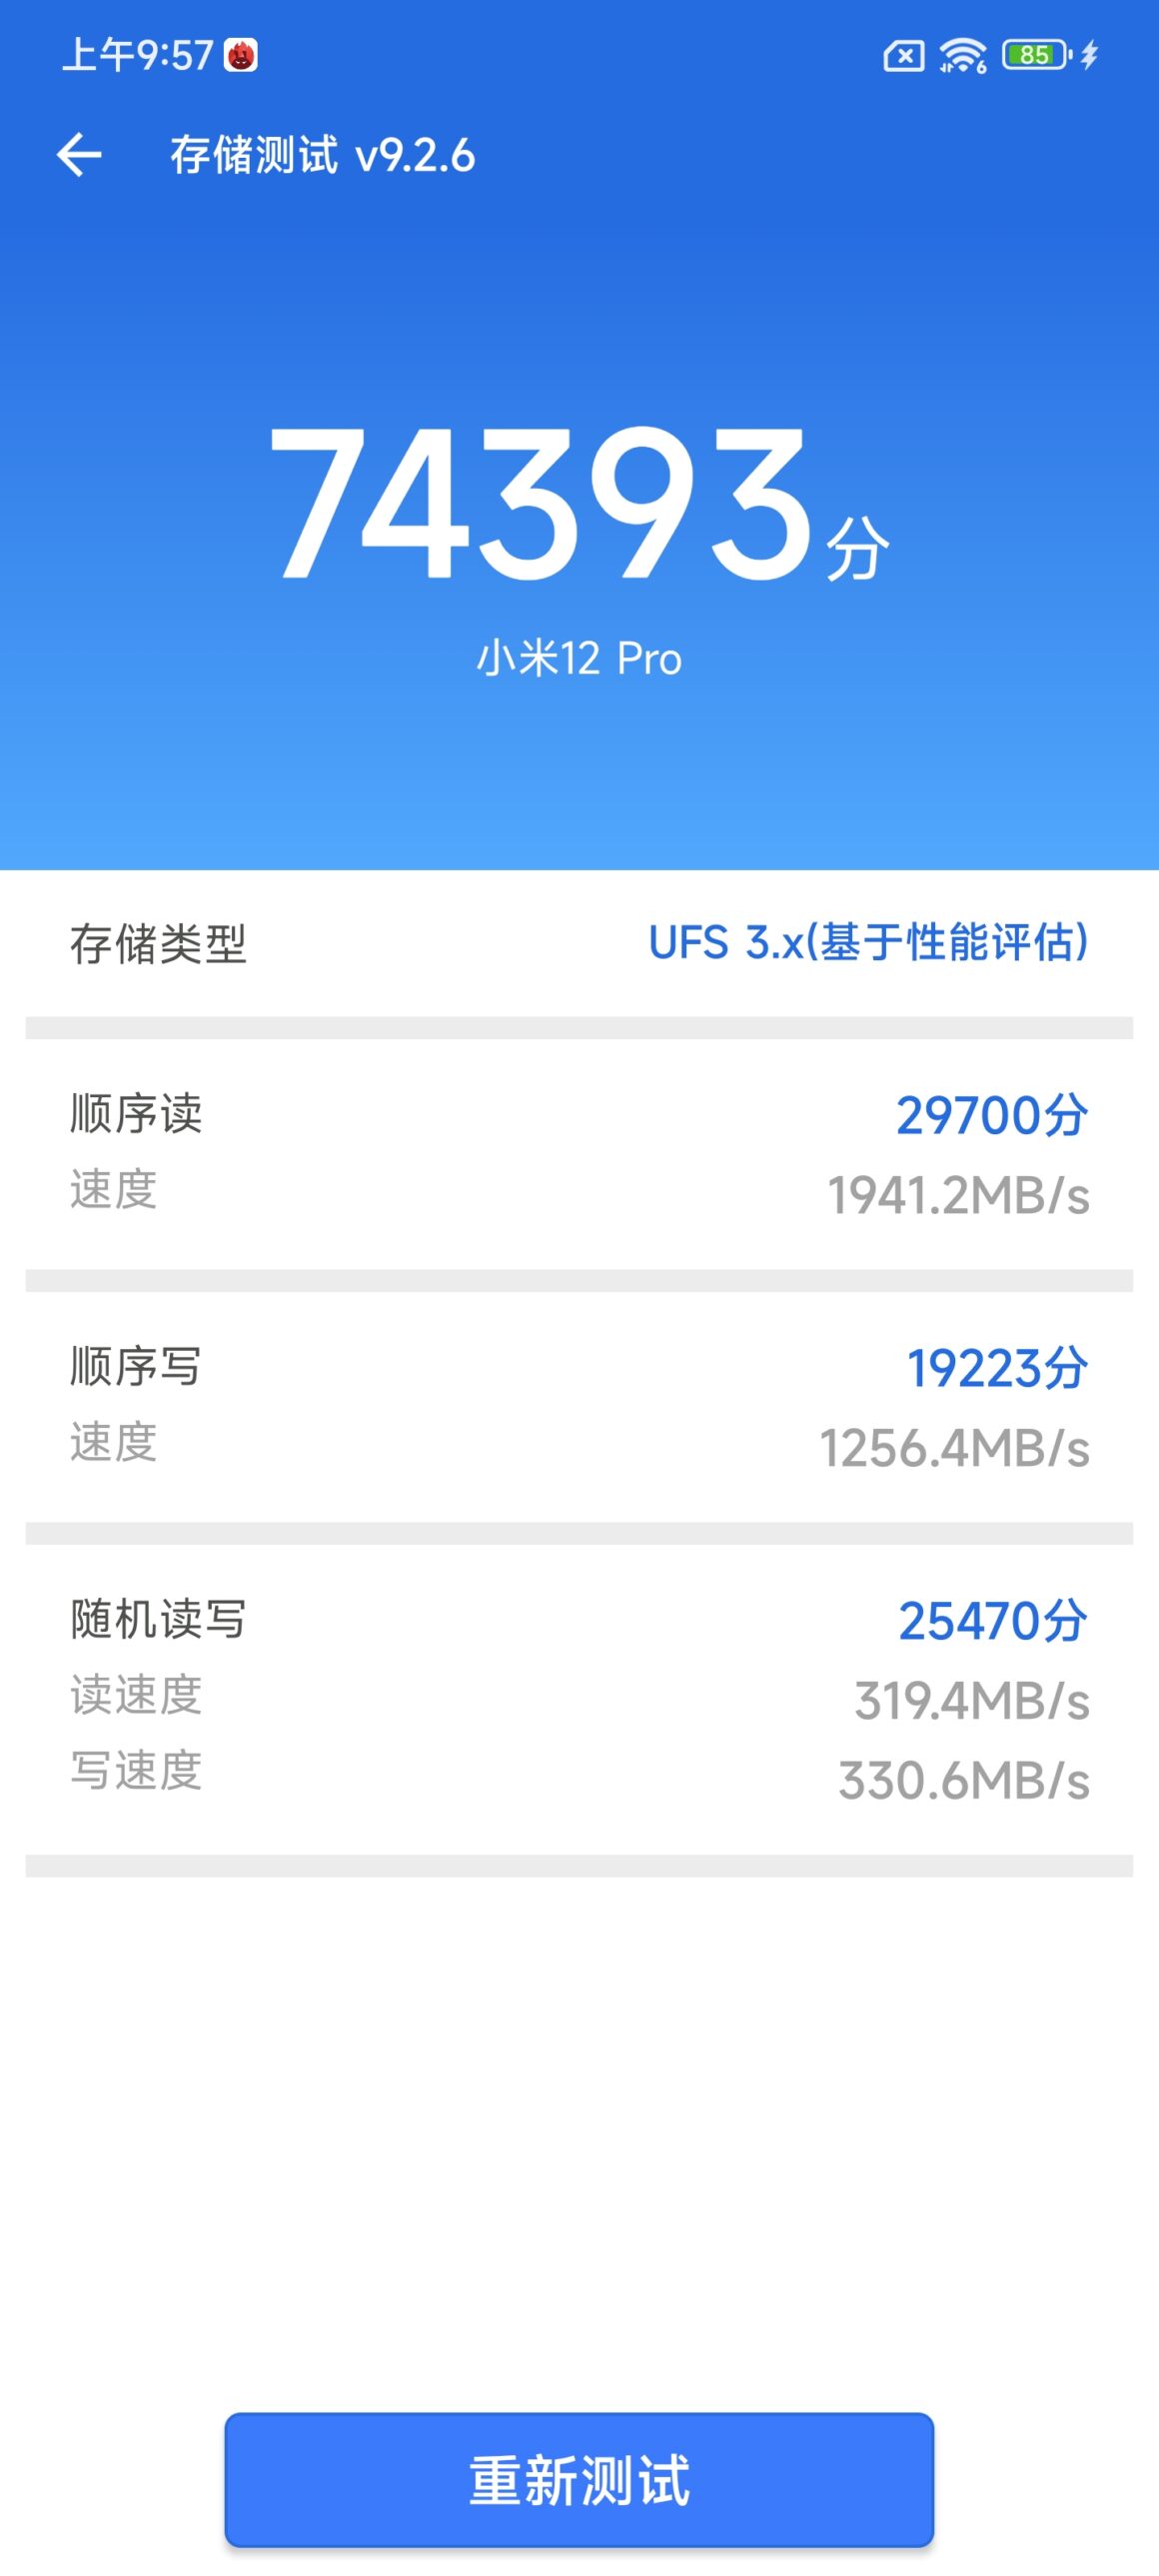 20211229075508 94684 1160x2578 - Xiaomi 12 Pro price, review, and full specs